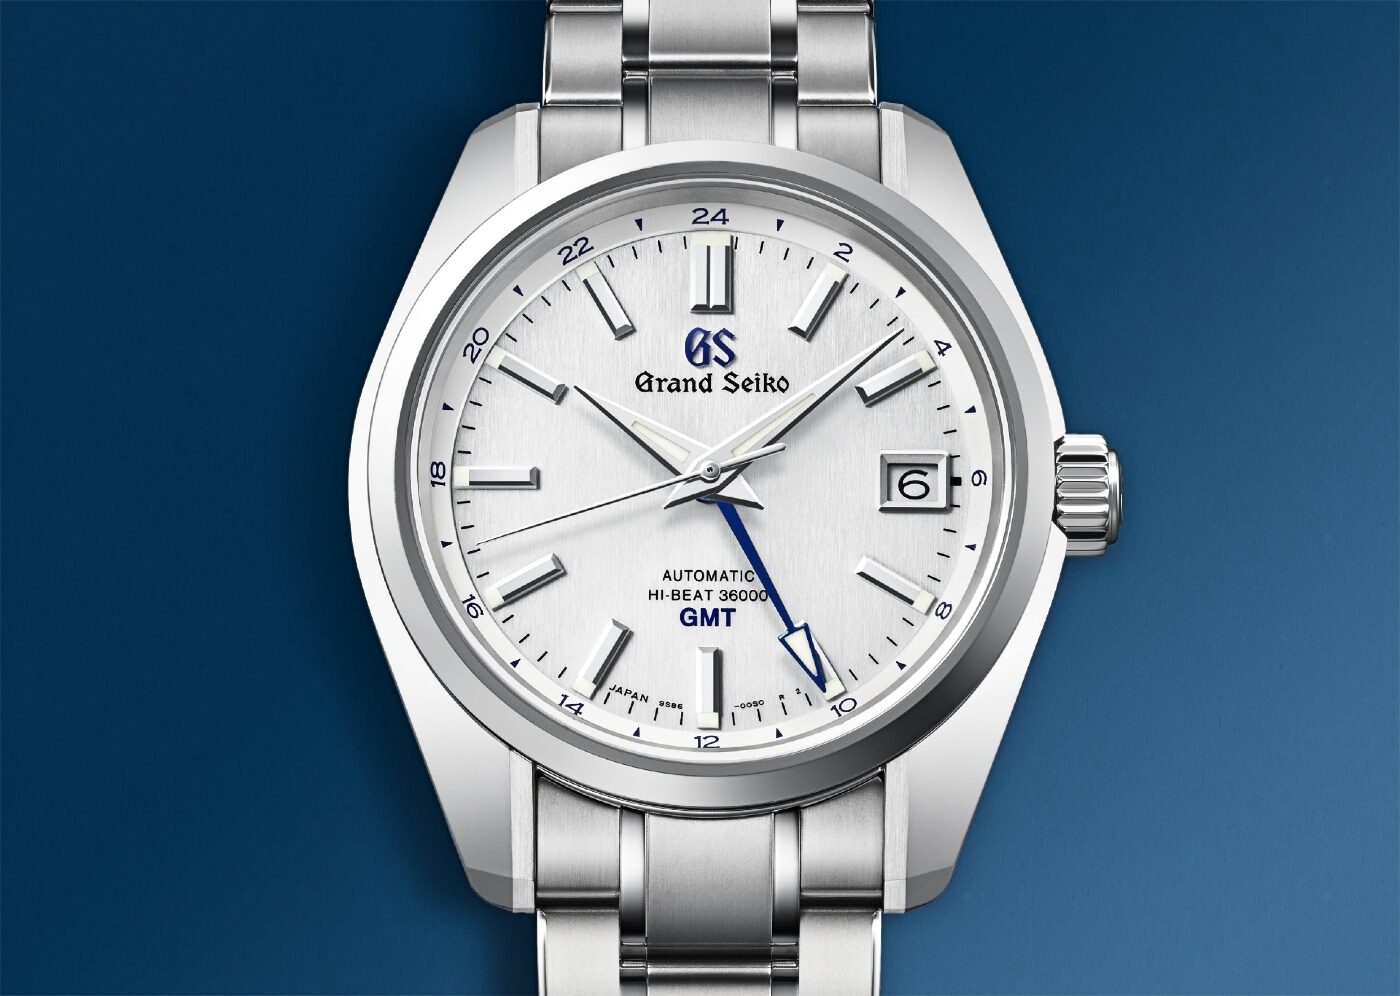 Grand Seiko Heritage Collection Hi-Beat 36000 GMT 44GS 55th Anniversary Limited Edition